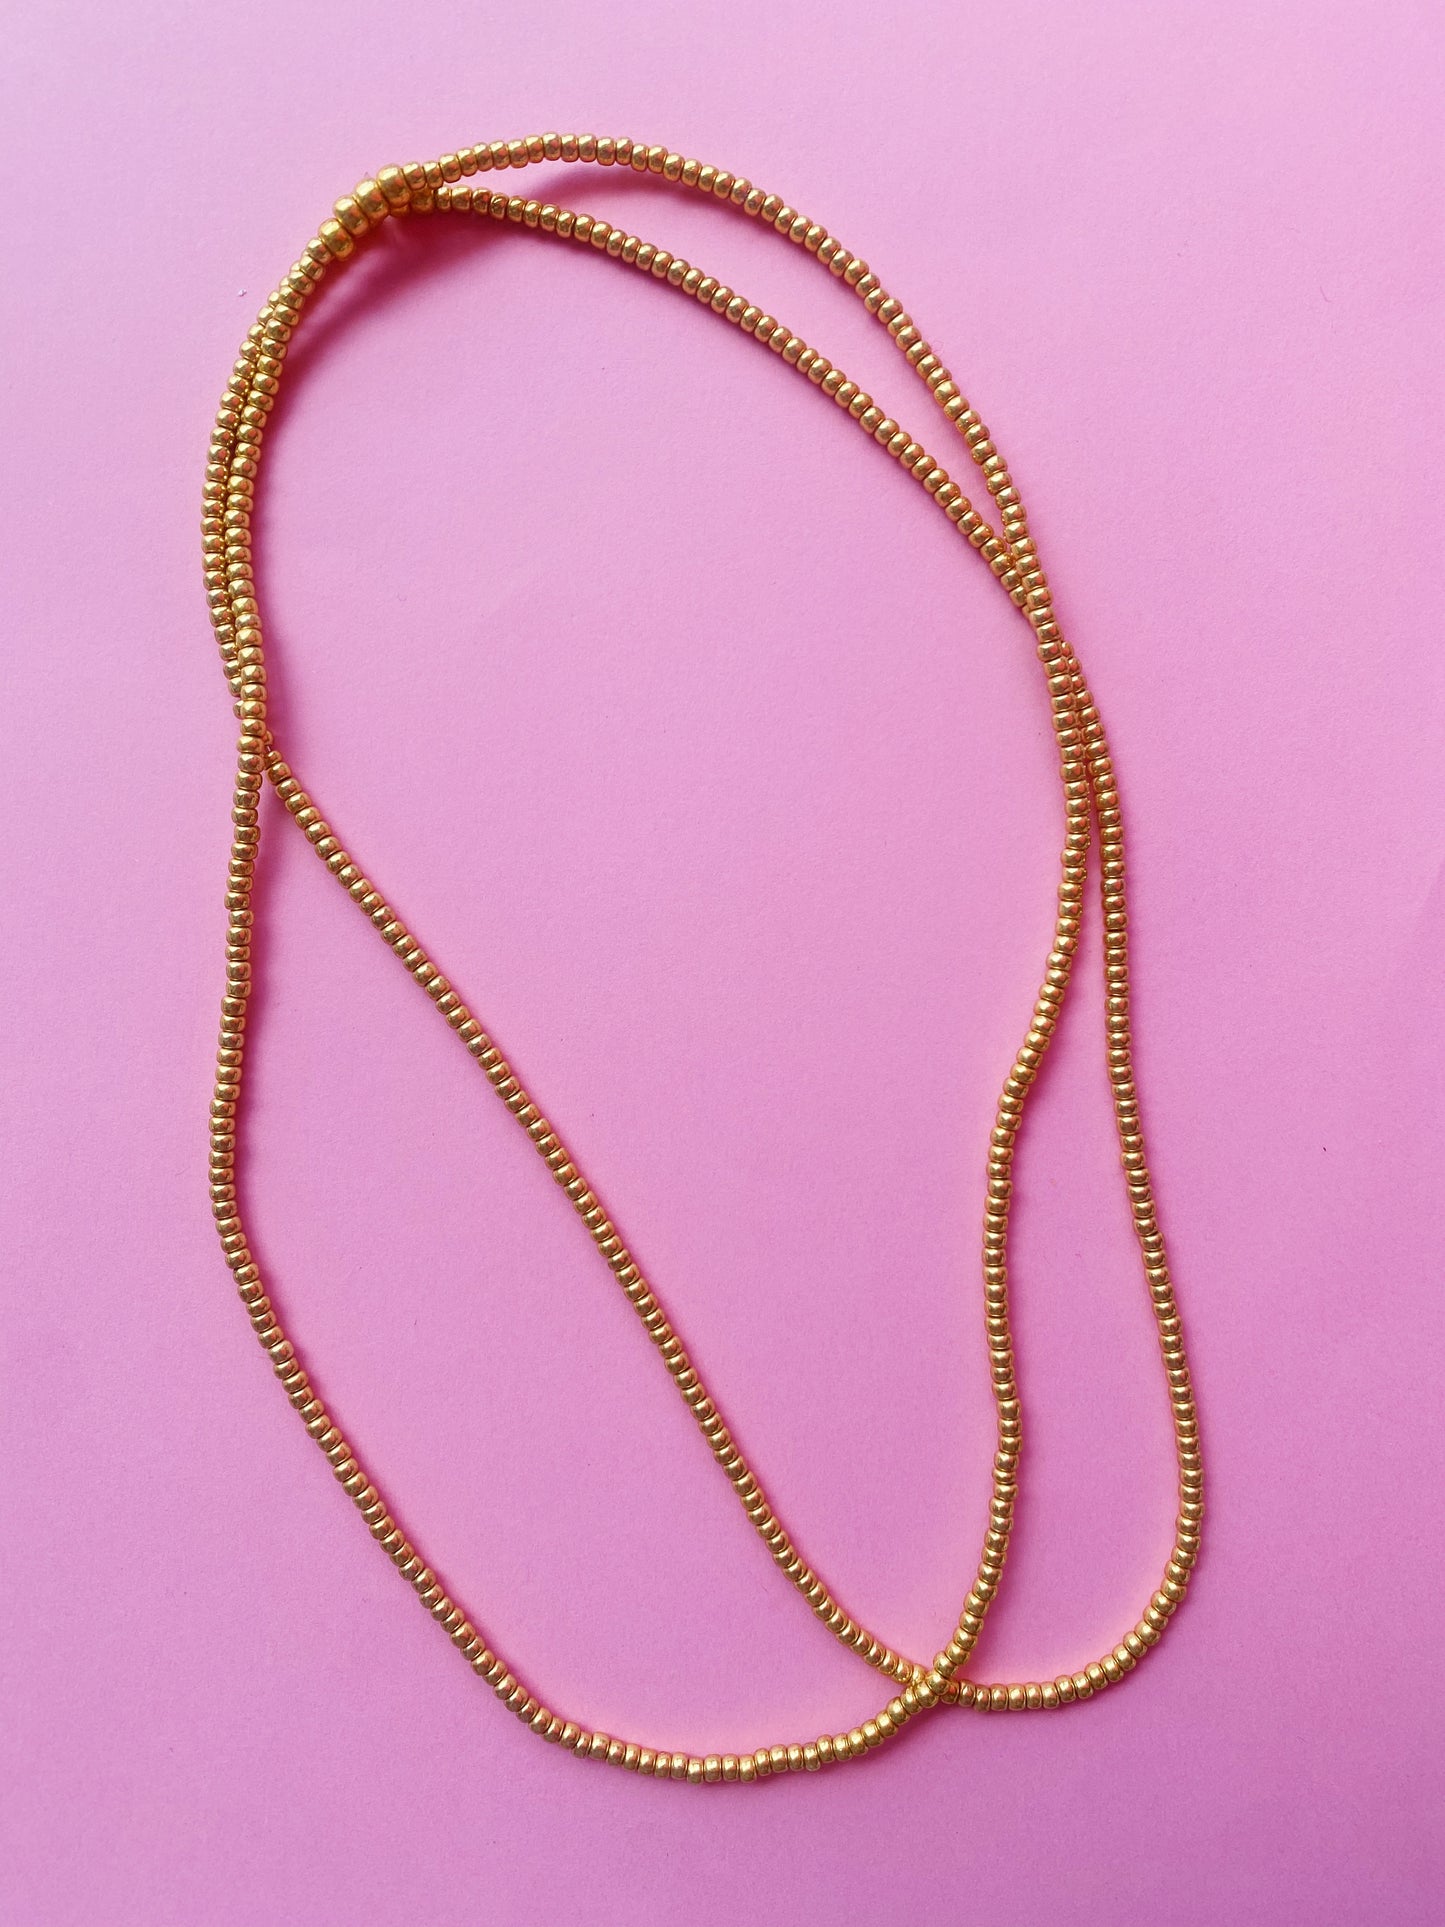 Gold stretchy necklace